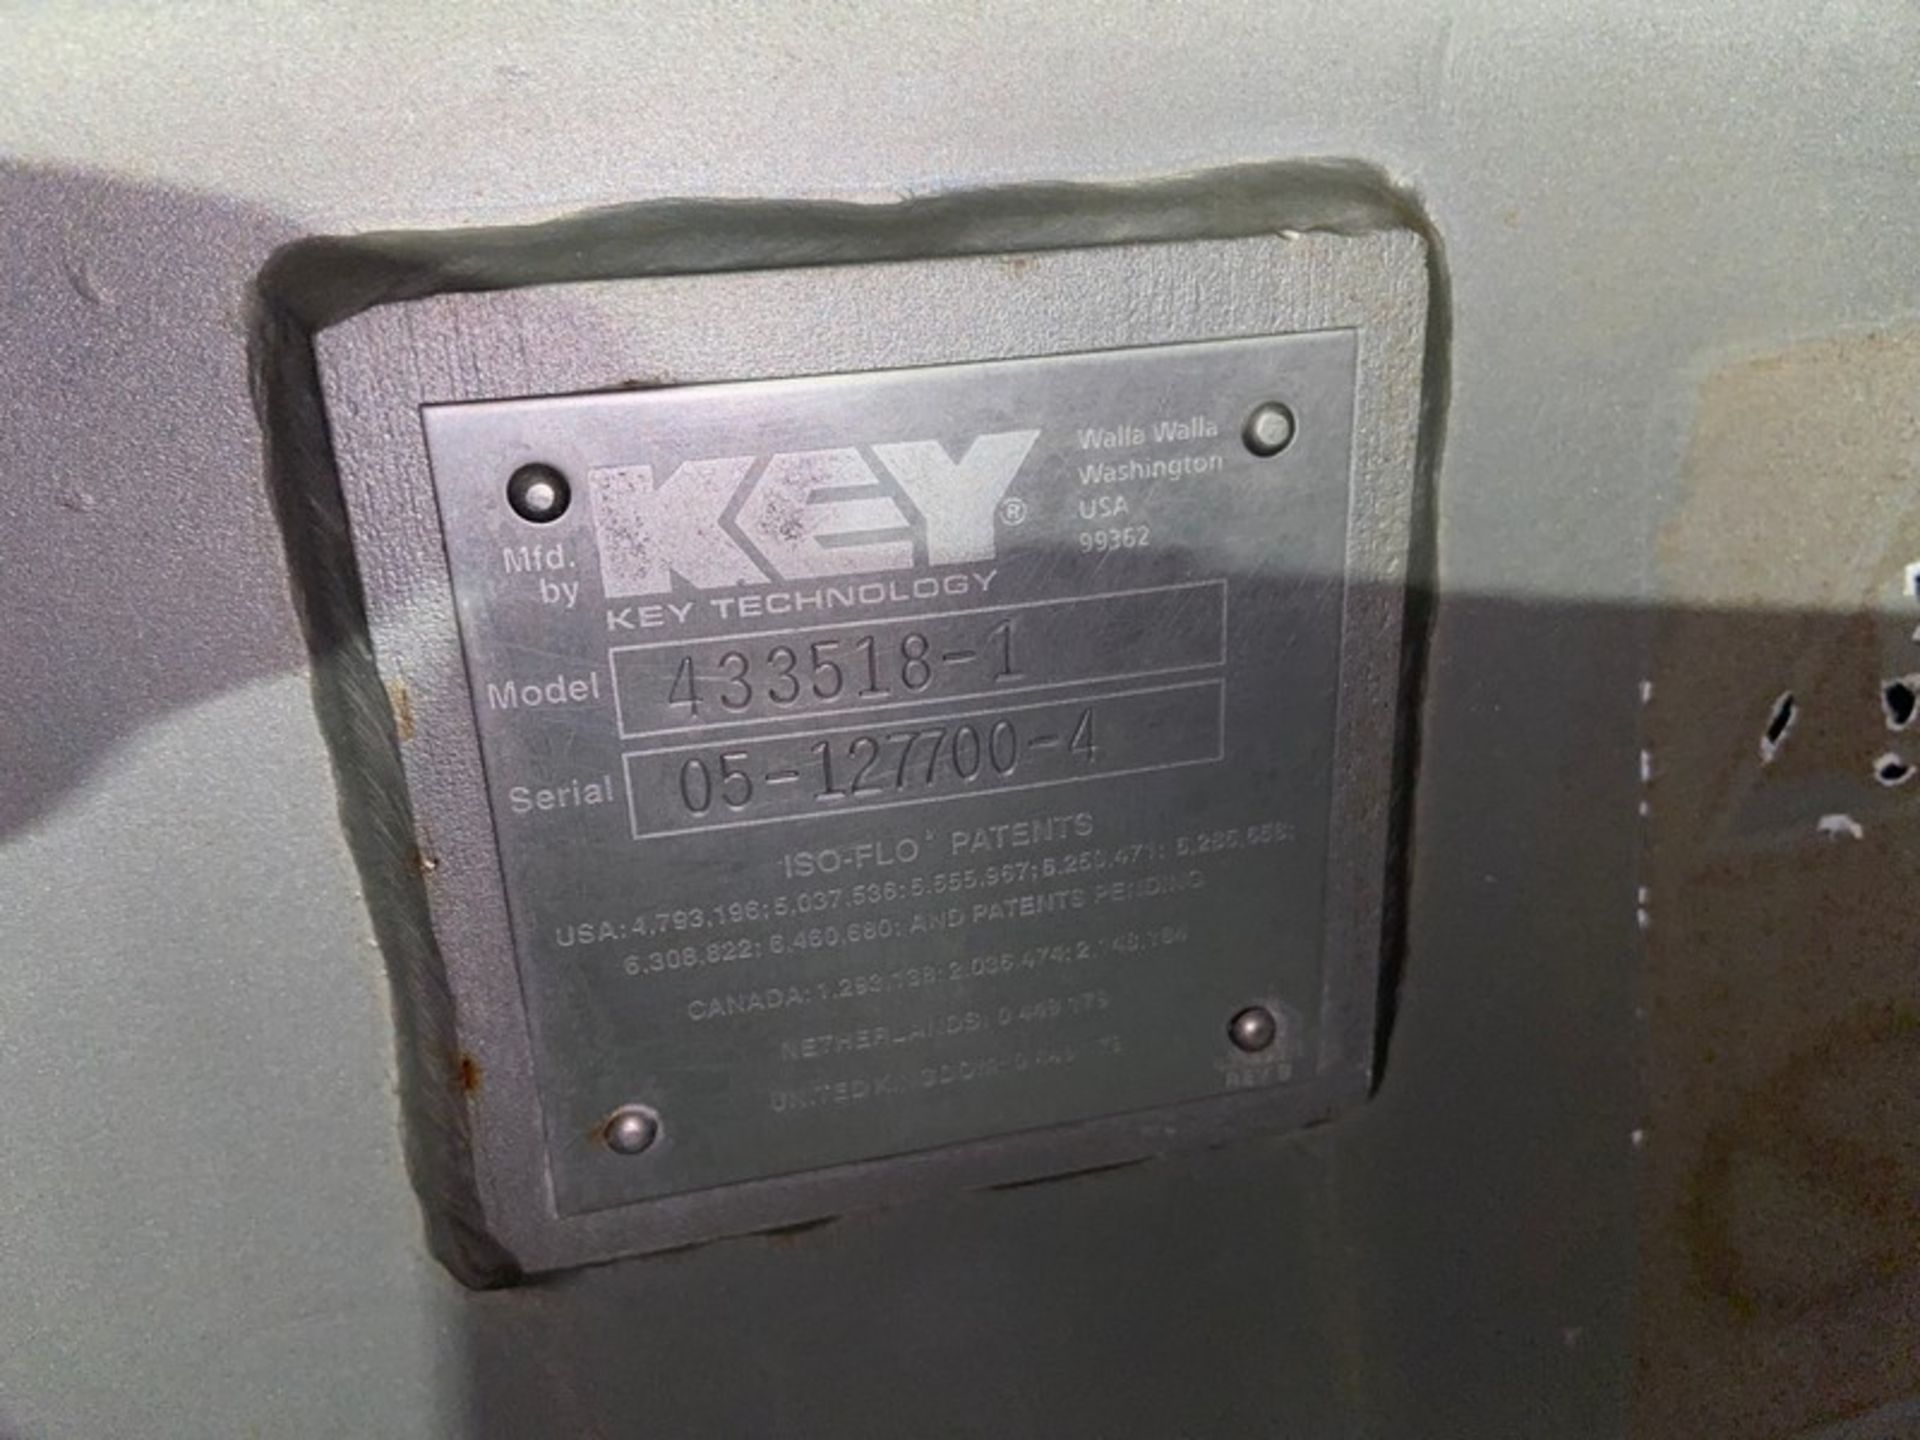 Key S/S Shaker Deck, M/N 433518-7, S/N 05-127700-4, Mounted on S/S Frame (LOCATED IN ATWATER, CA) - Image 3 of 5